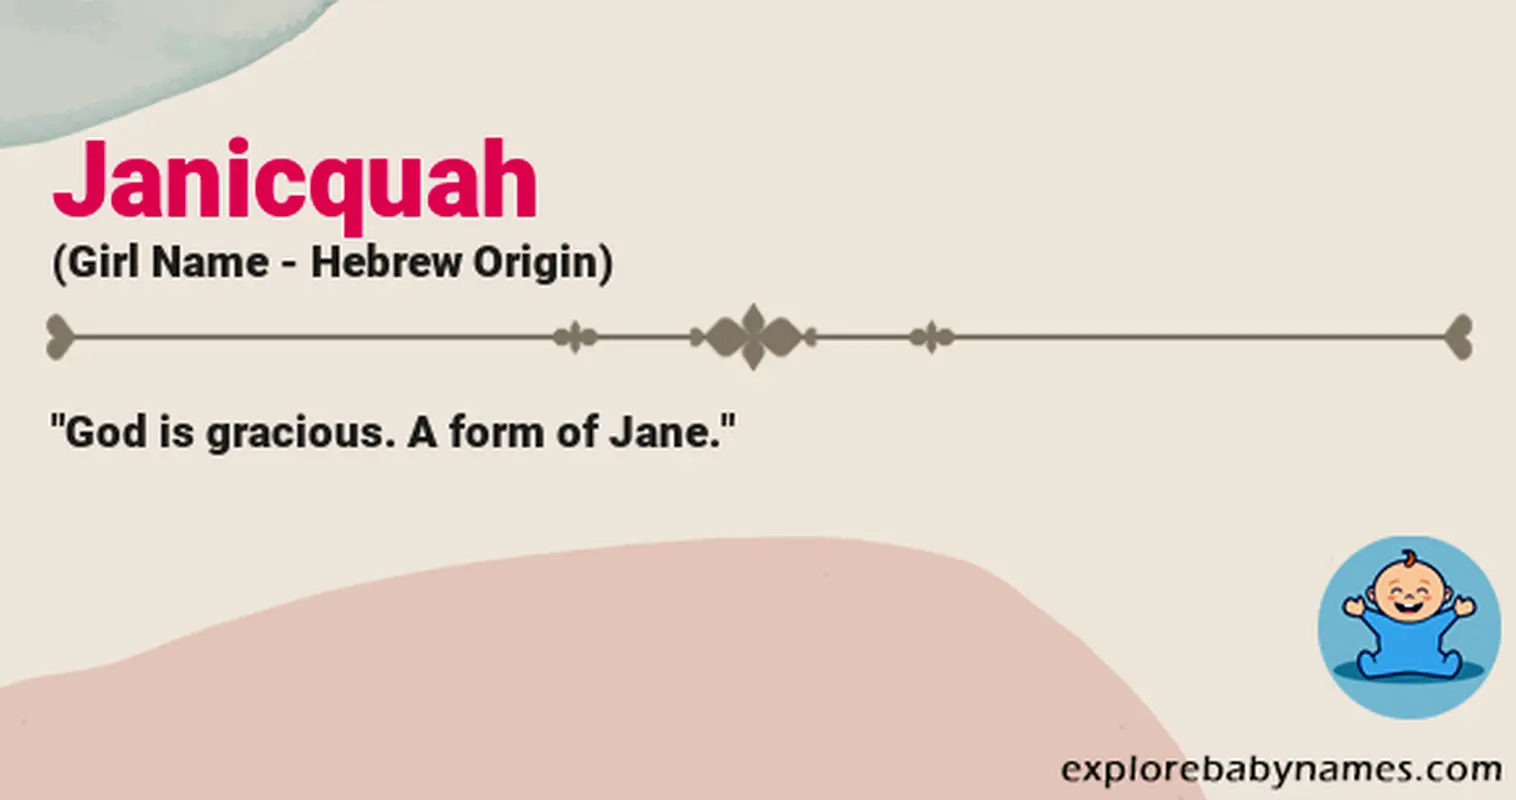 Meaning of Janicquah